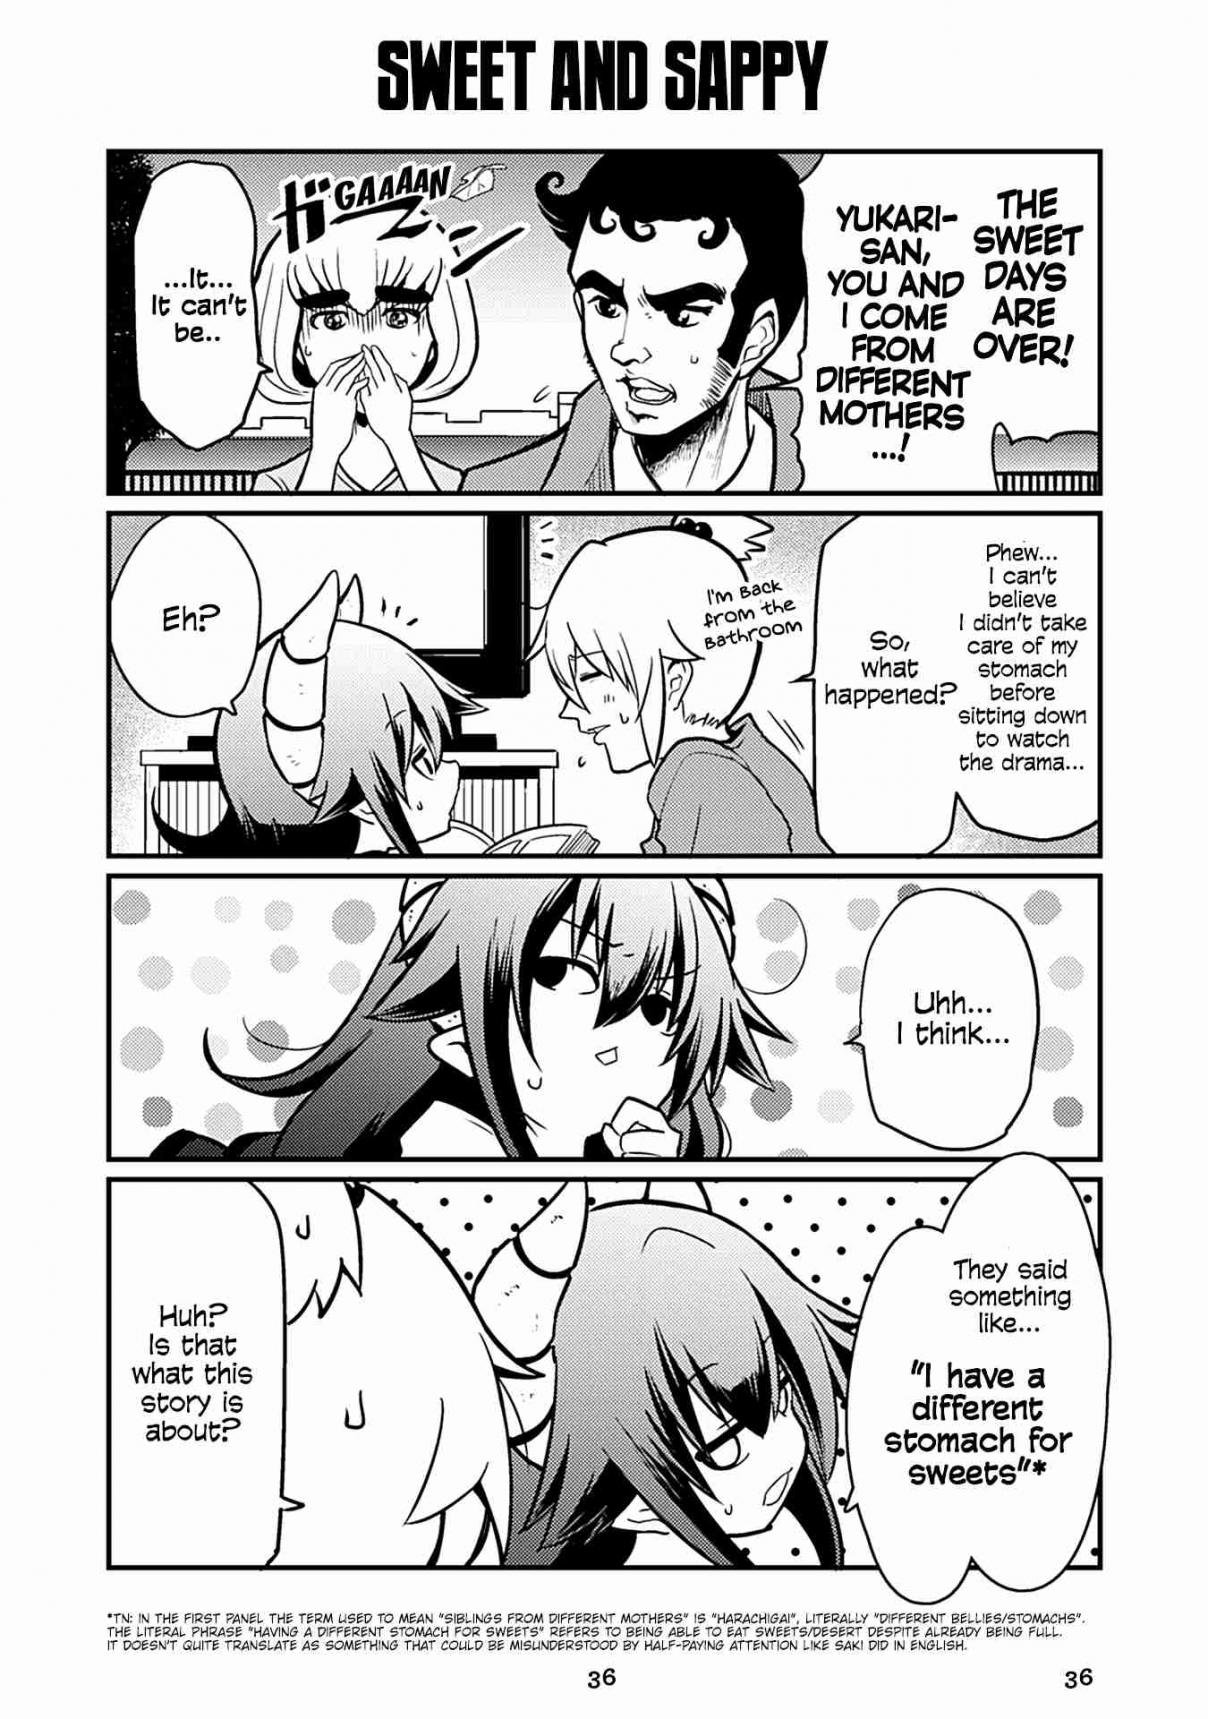 Naughty Succubus "Saki chan" Vol. 2 Ch. 128 Sweet and Sappy